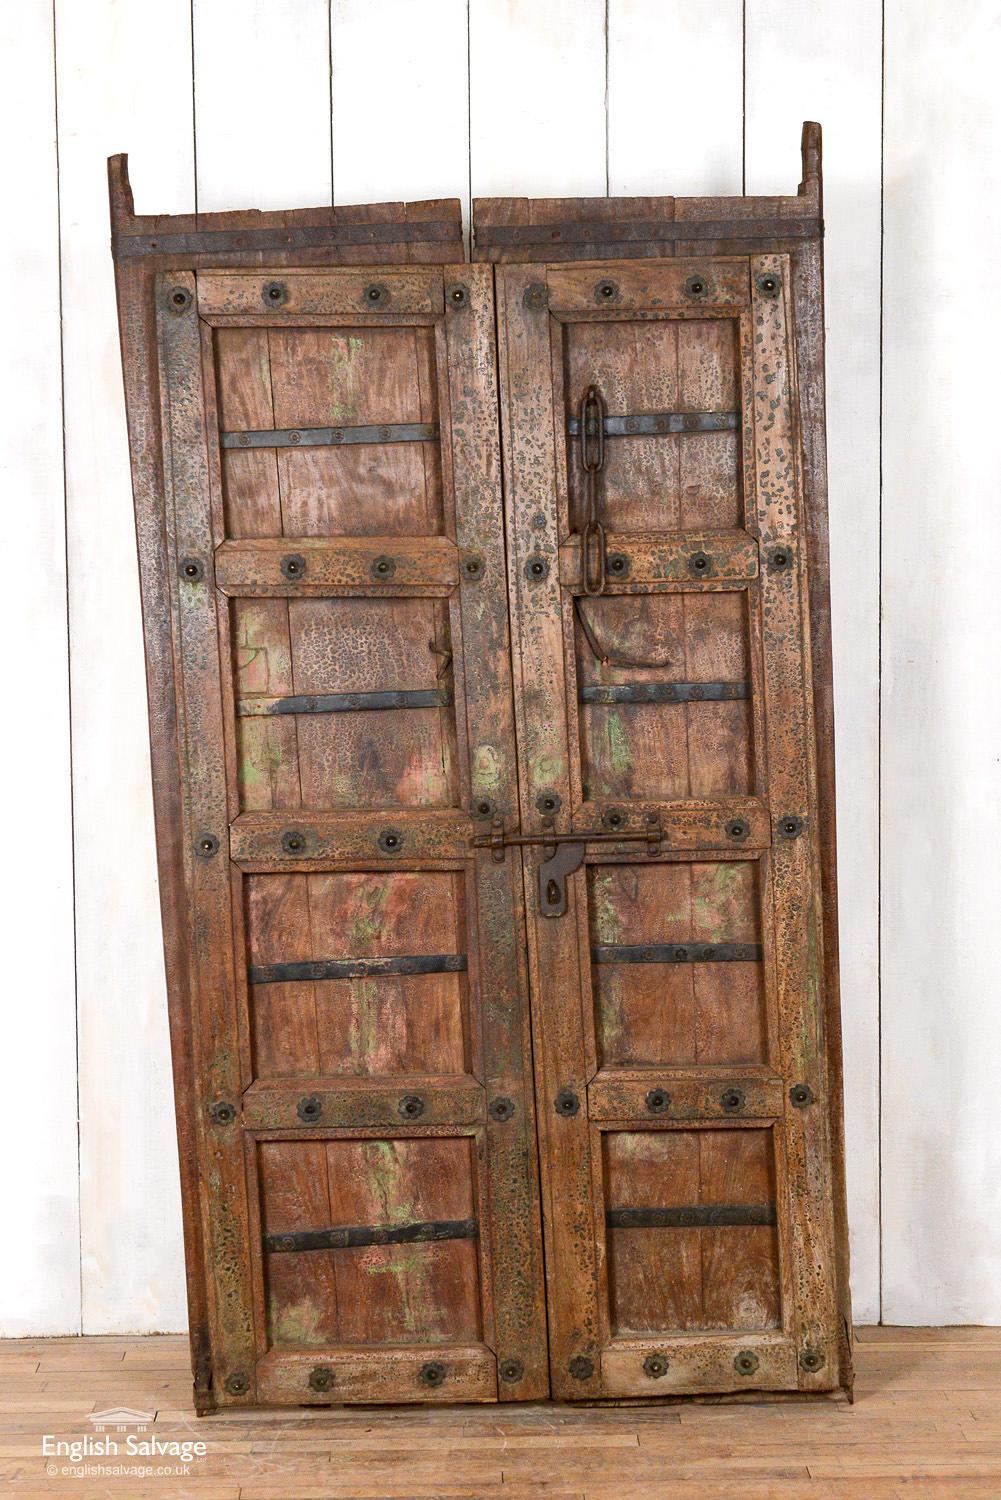 Old Indian teak panel made from a pair of doors. Barring at the back of the doors can be removed to make a pair of doors. Iron work studs and fixings give this door wonderful character. Some splits, scrapes and scuffs commensurate with age but